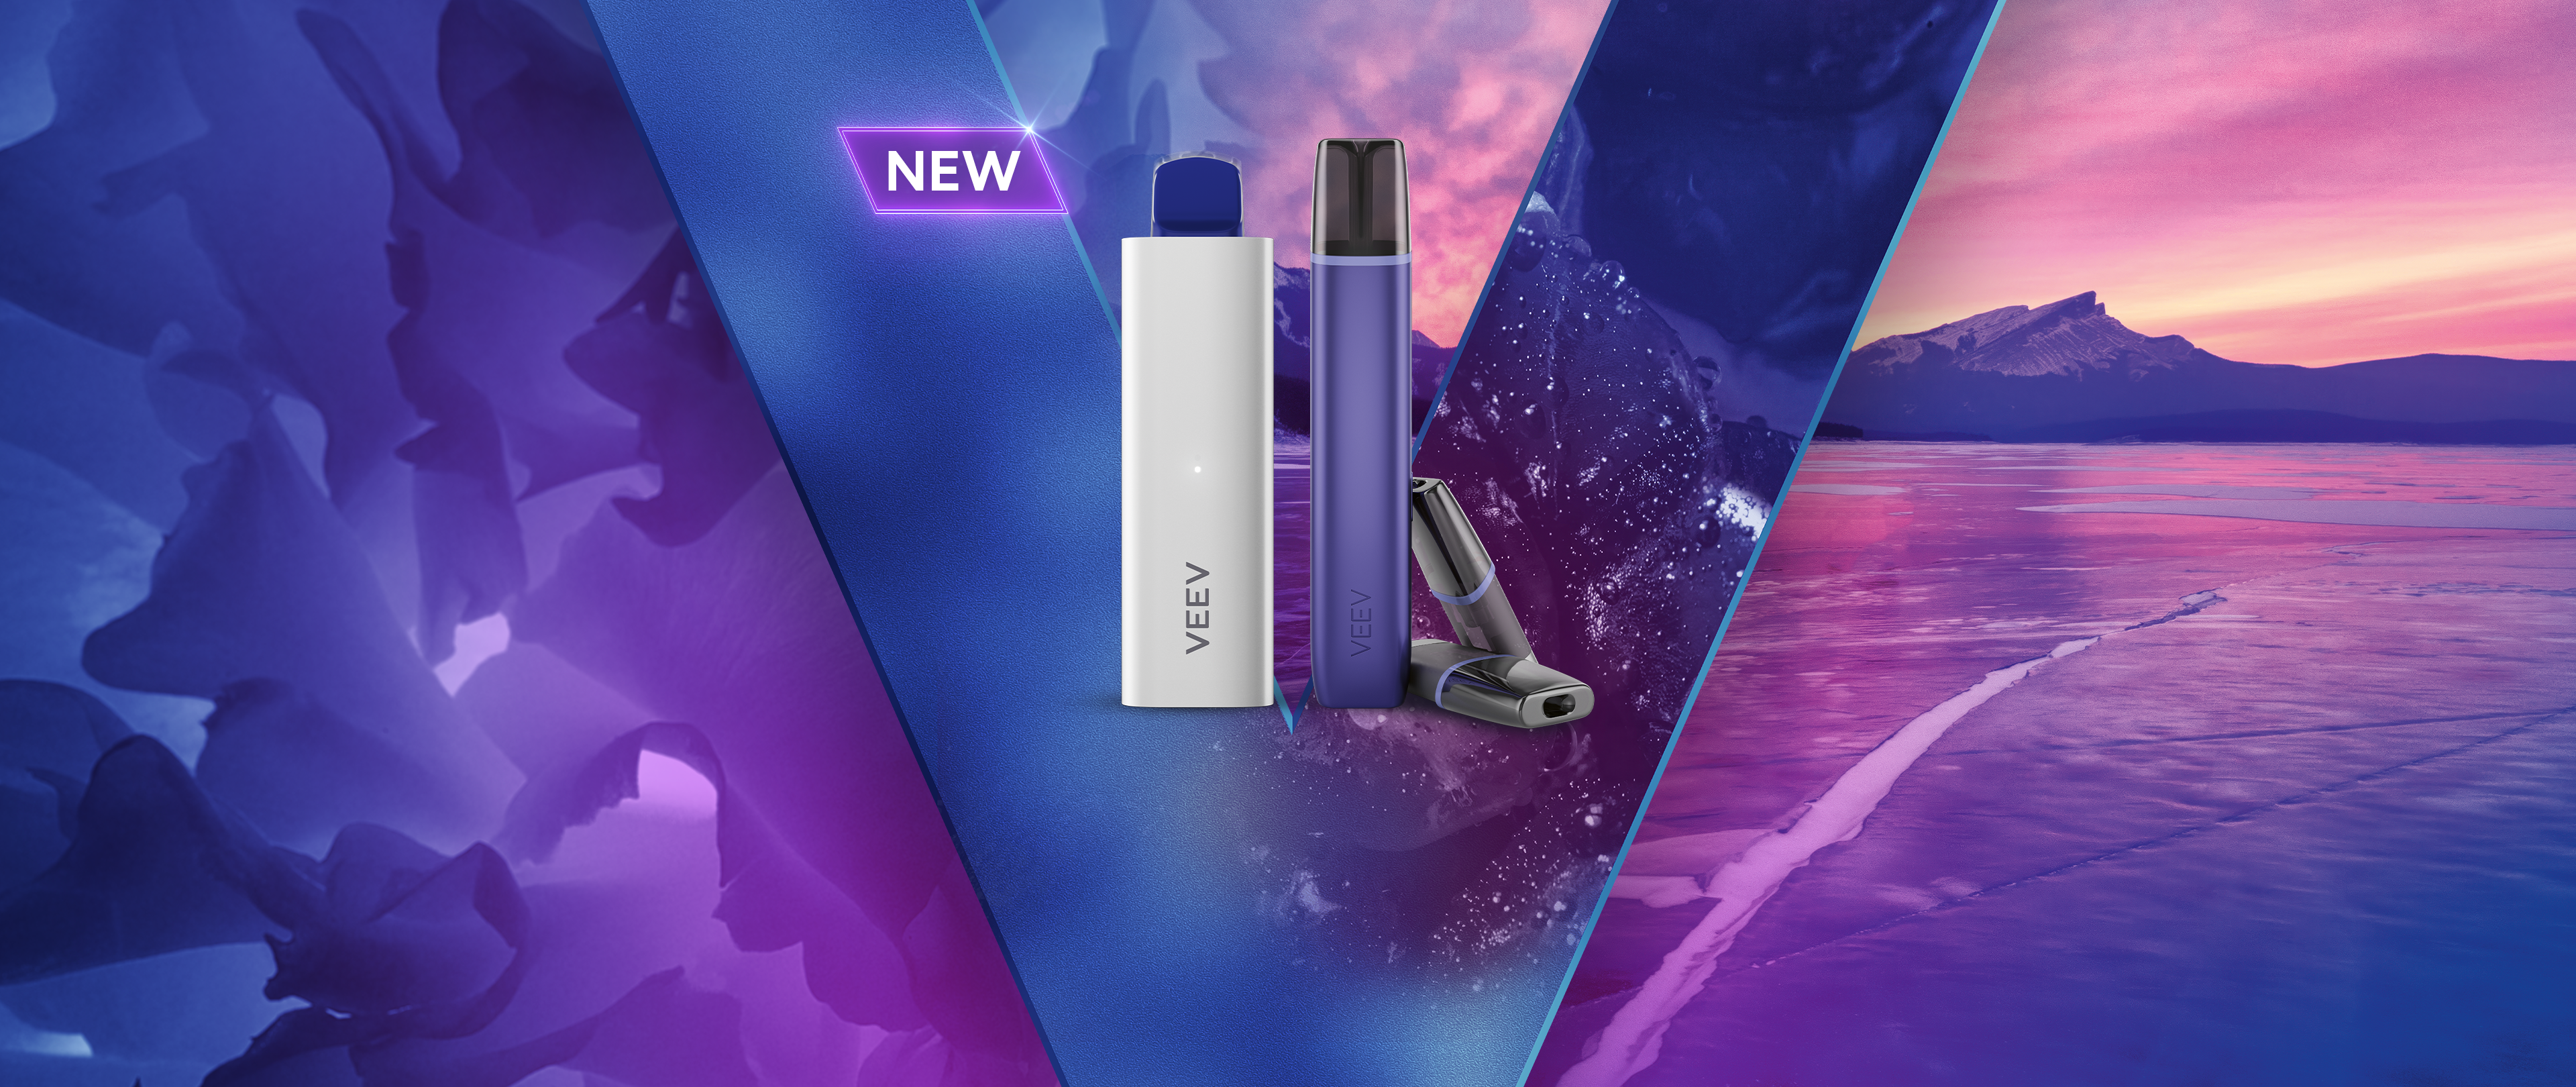 Intense fruit- VEEV NOW 5 mL and VEEV NOW device on purple background.